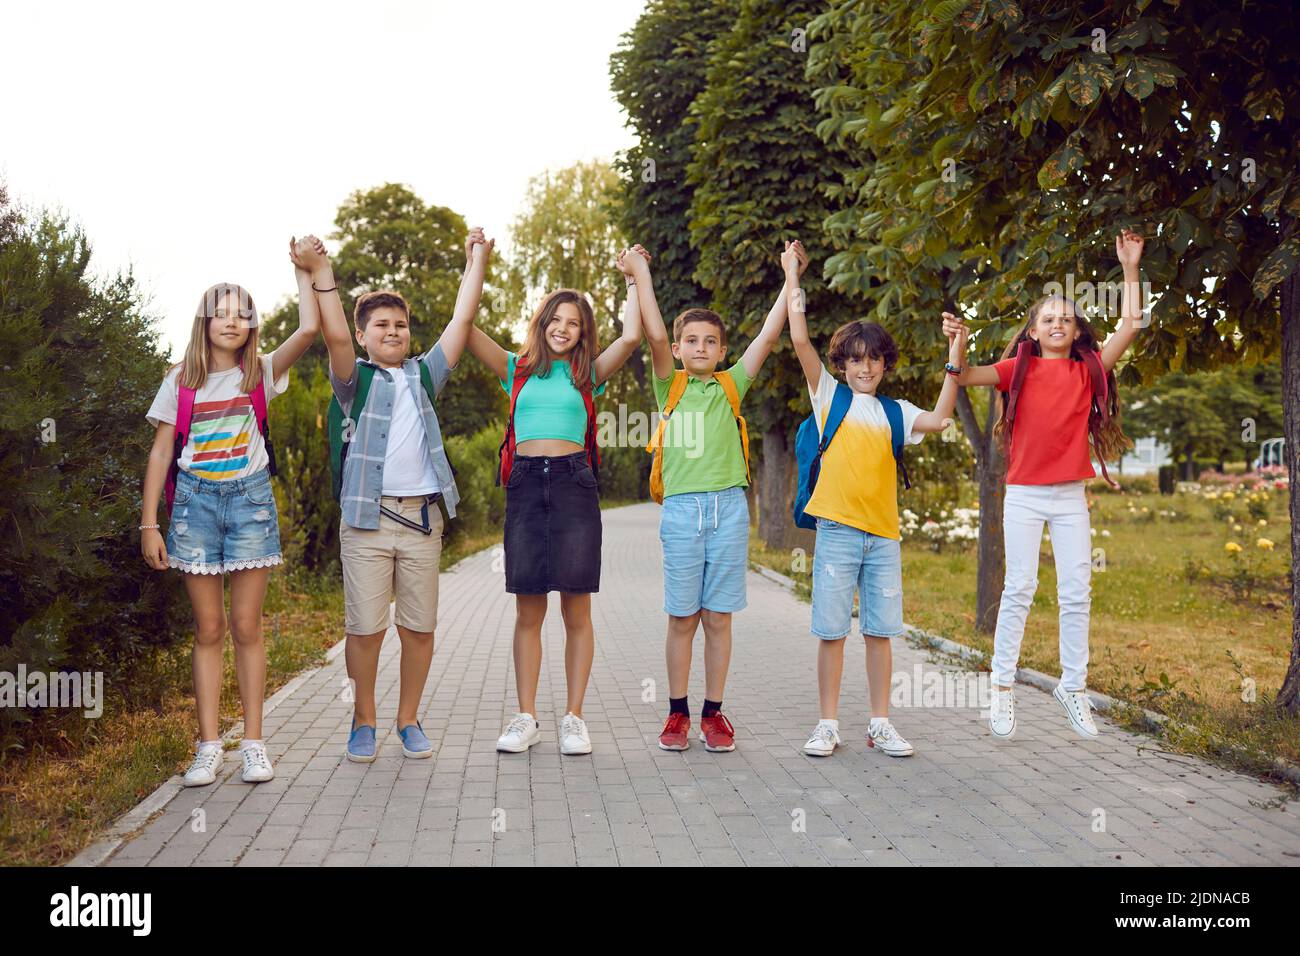 Group of happy school kids with backpacks standing on a park path, holding hands and smiling Stock Photo